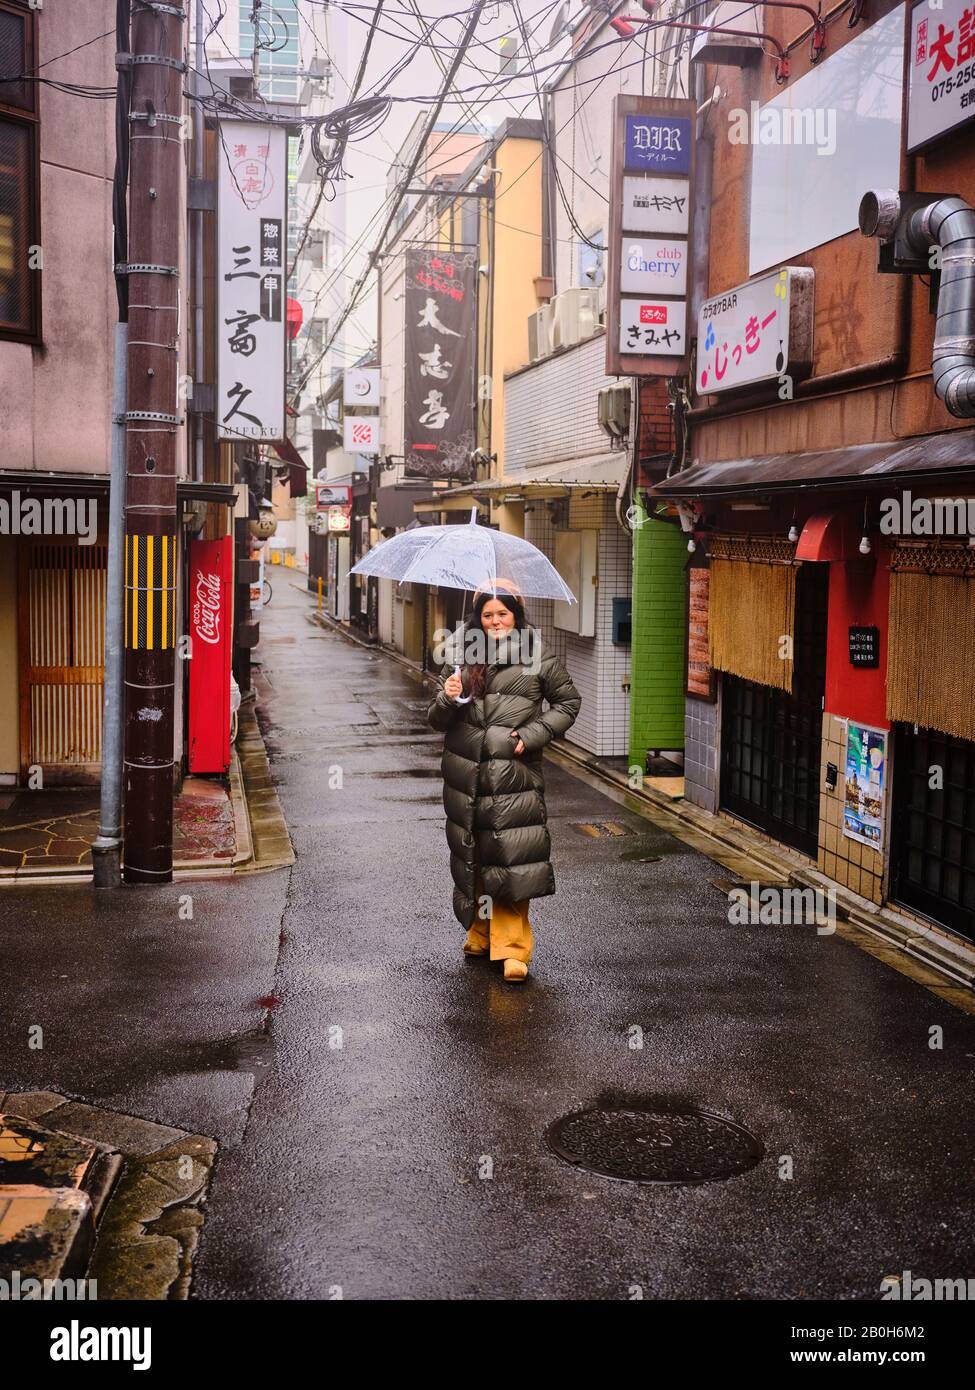 Woman in long rain jacket stands with umbrella in an alley Kyoto Japan Stock Photo